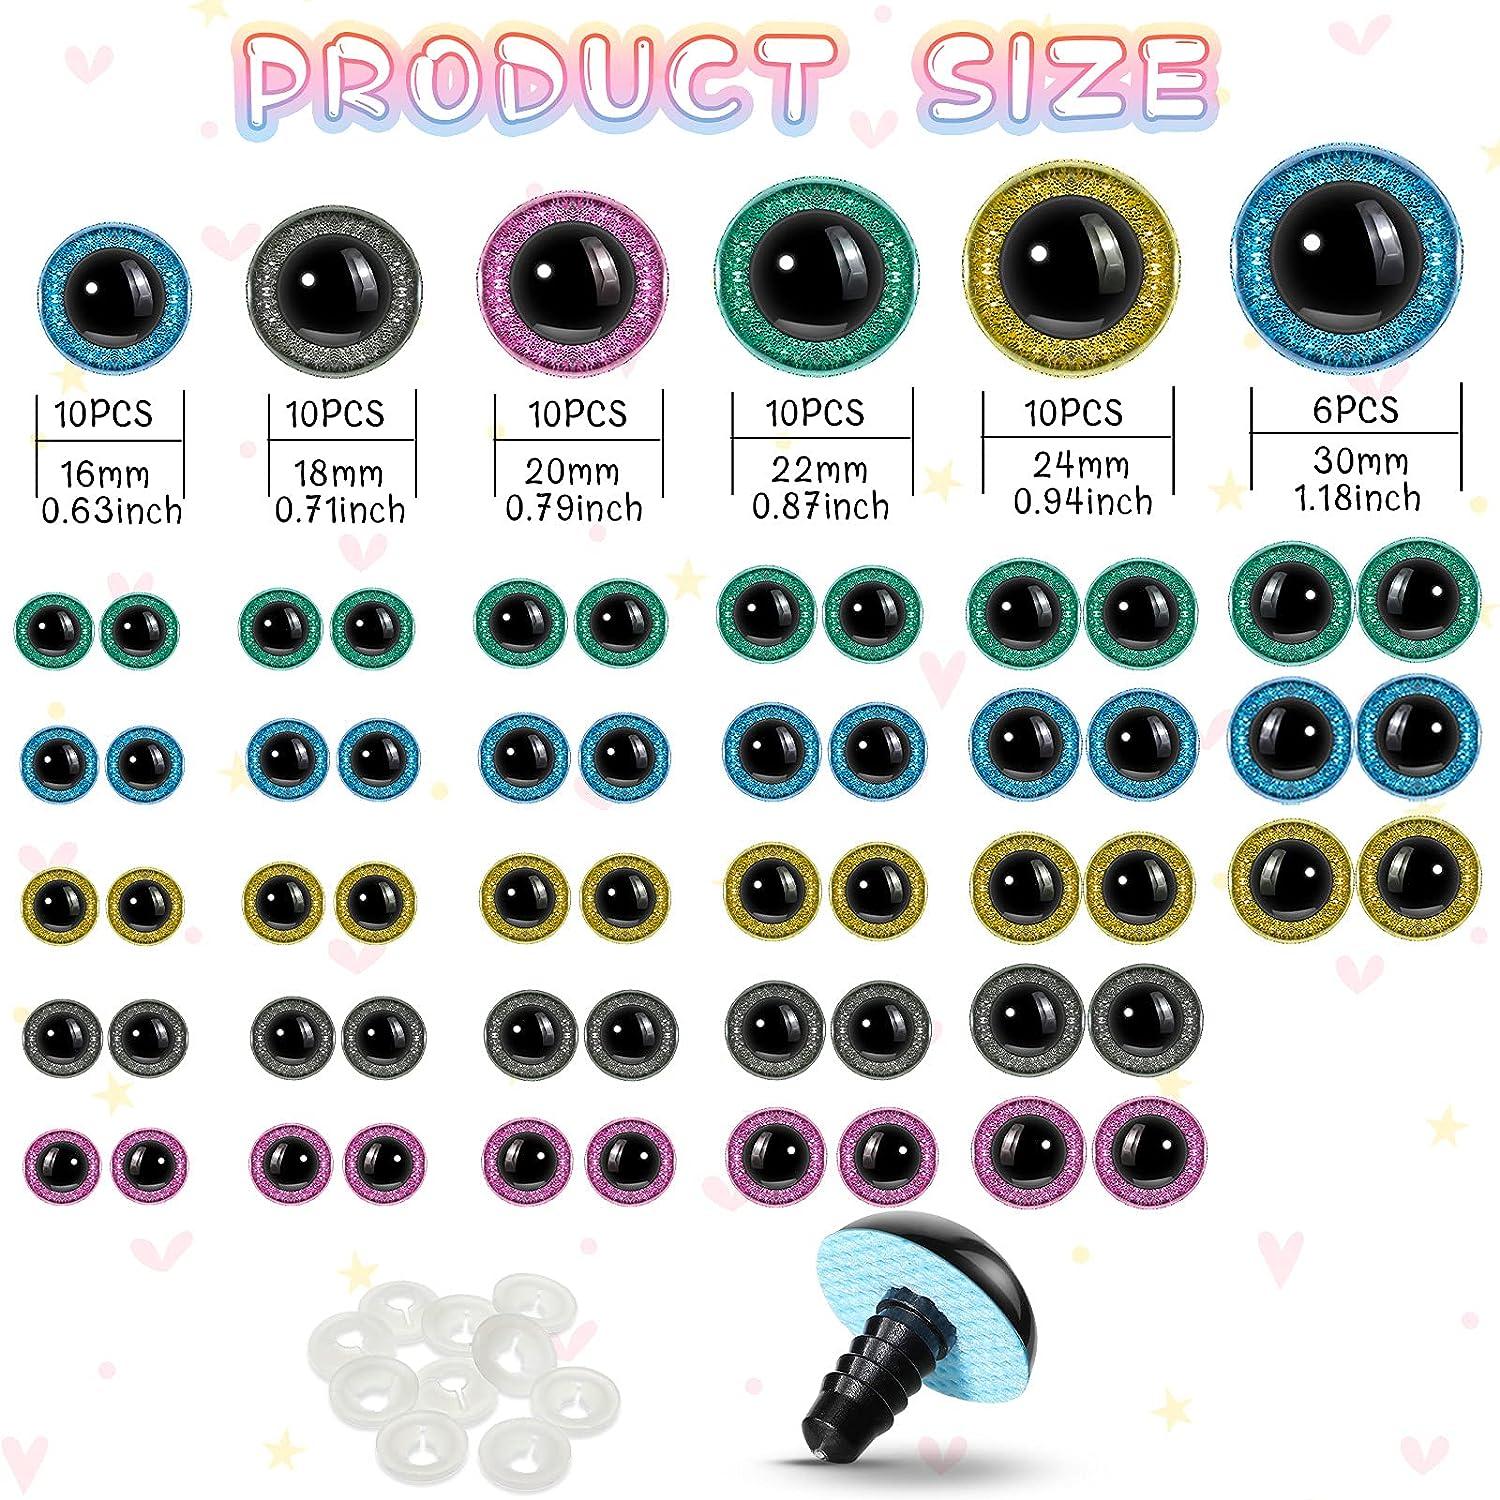 56 Pieces 16HTAIGUO 30 mm Safety Eyes Crochet Stuffed Animal Eyes Amigurumi  Plastic Doll Eyes Safety Eyes for DIY of Puppet, Bear Crafts, Toy Doll  Making Supplies, 6 Sizes (Black) 